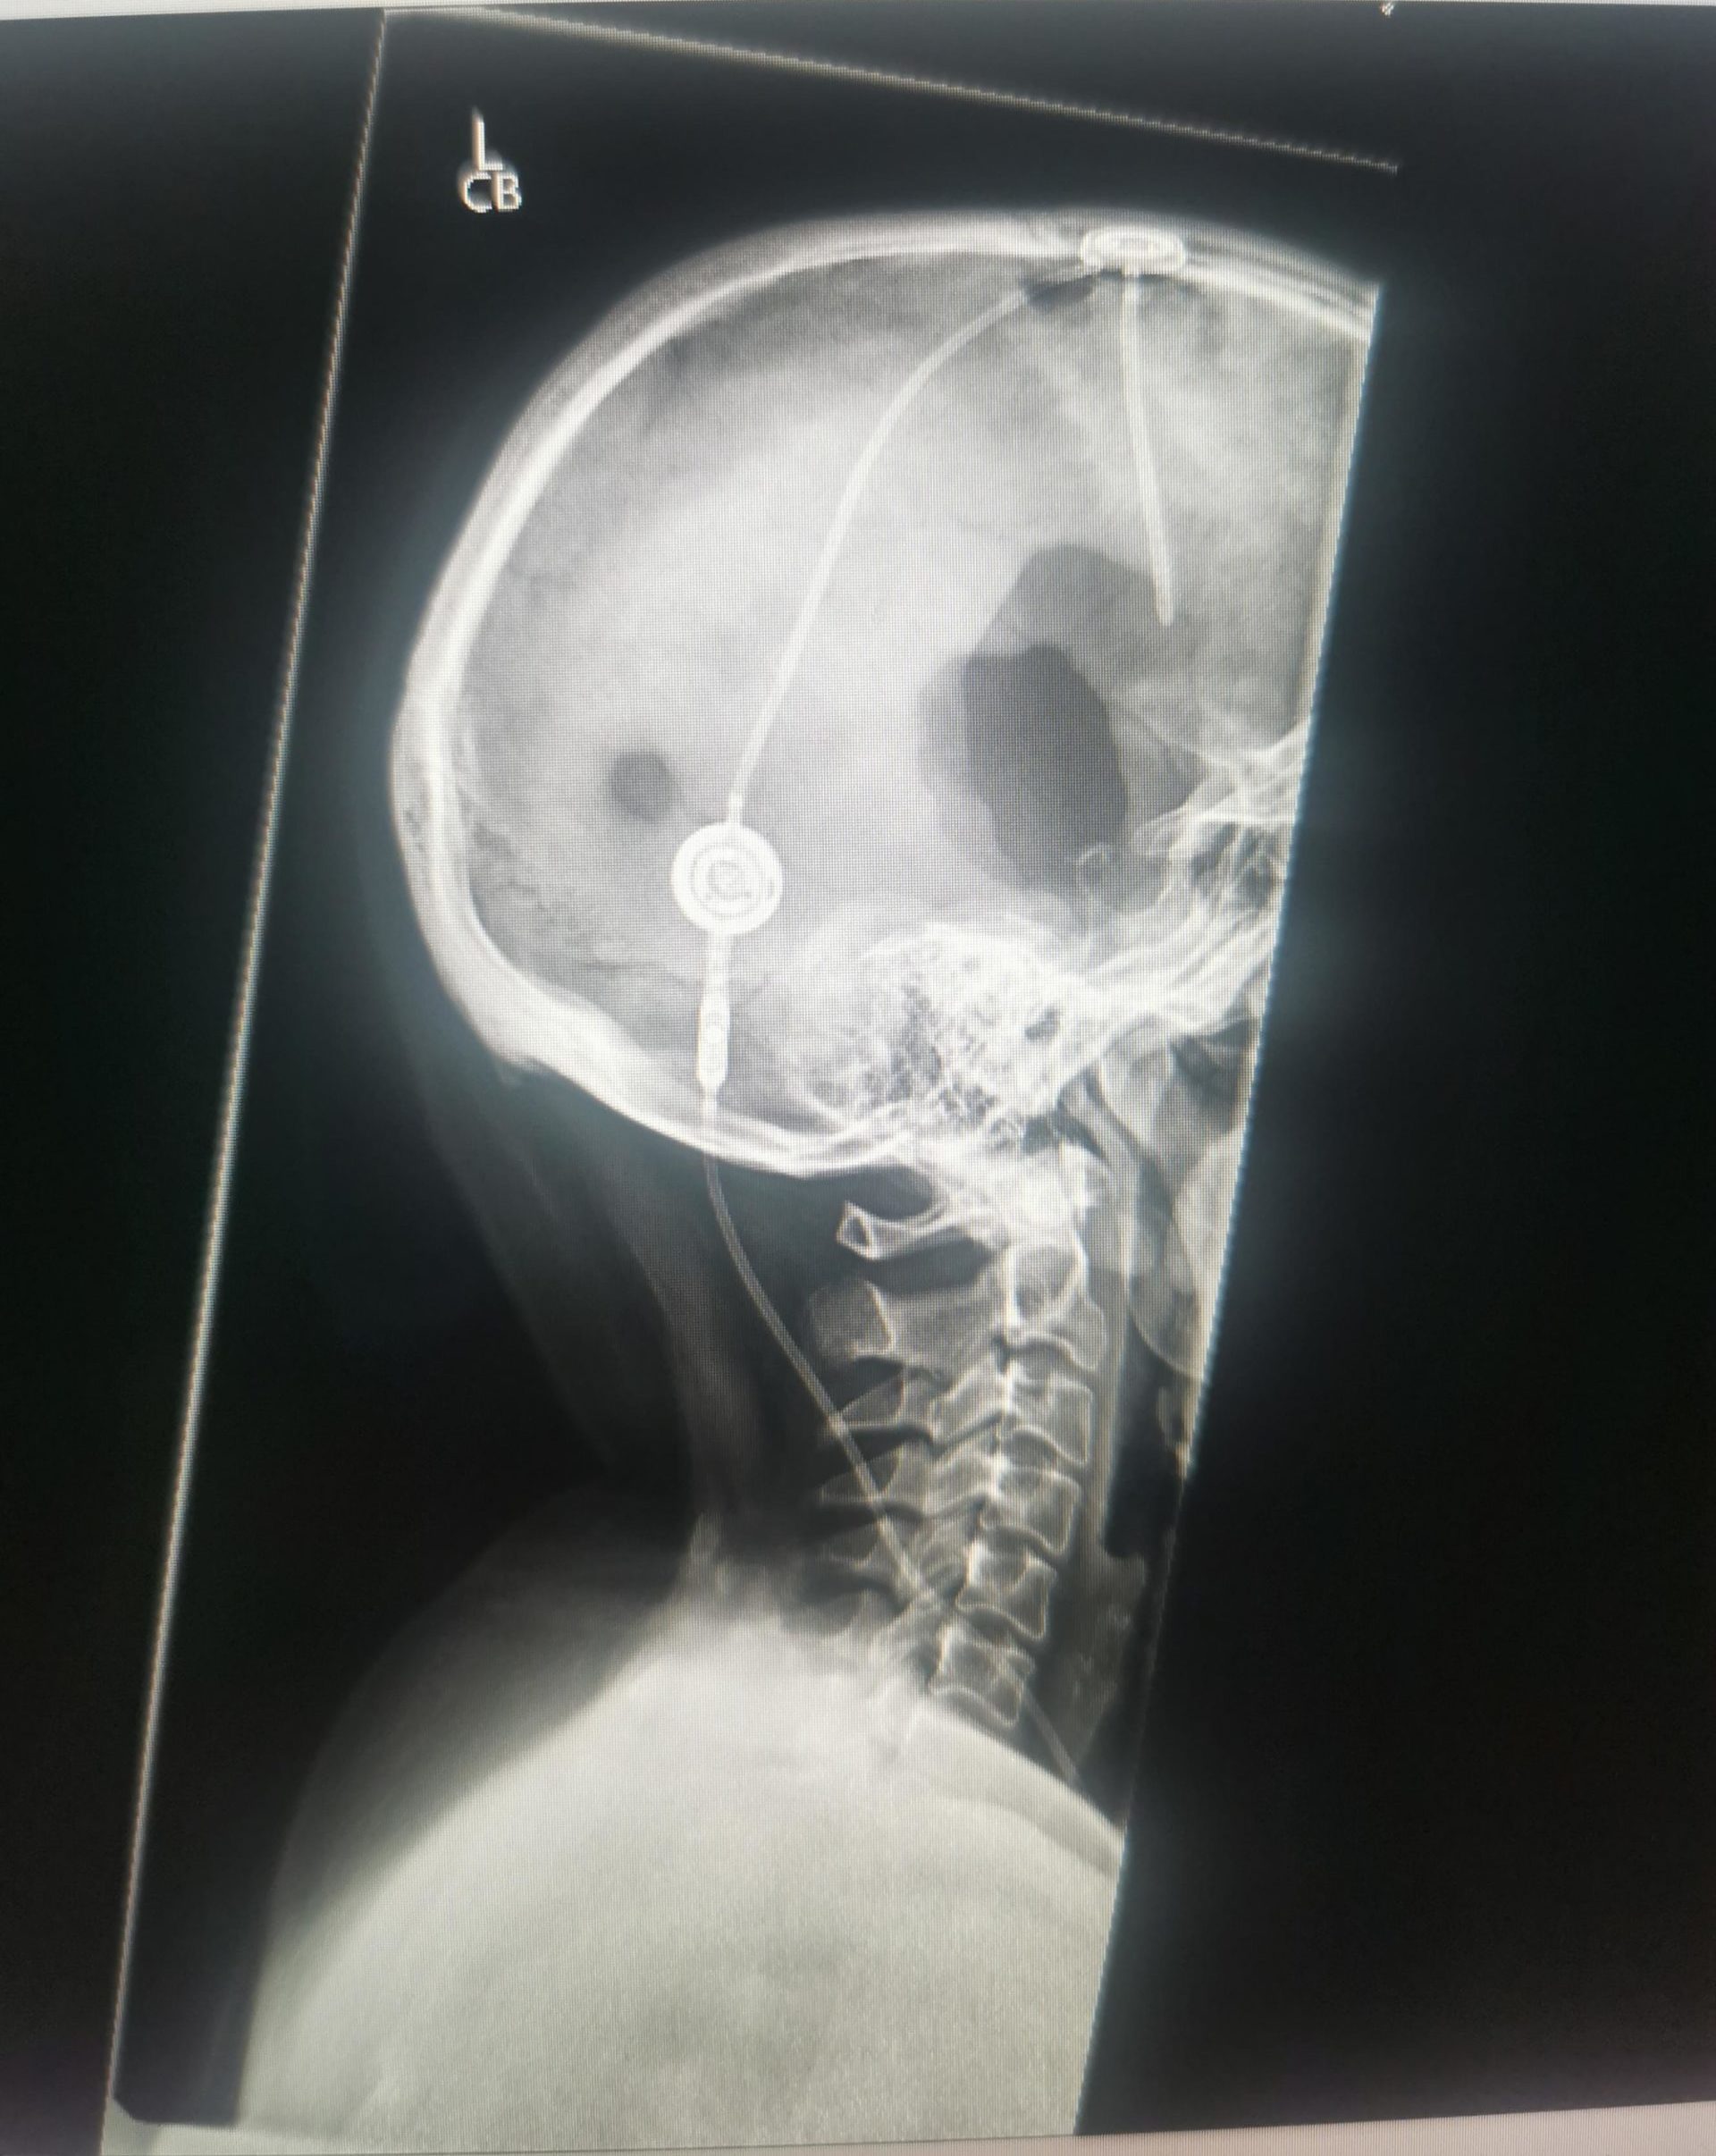 A head x-ray showing a tube in the brain